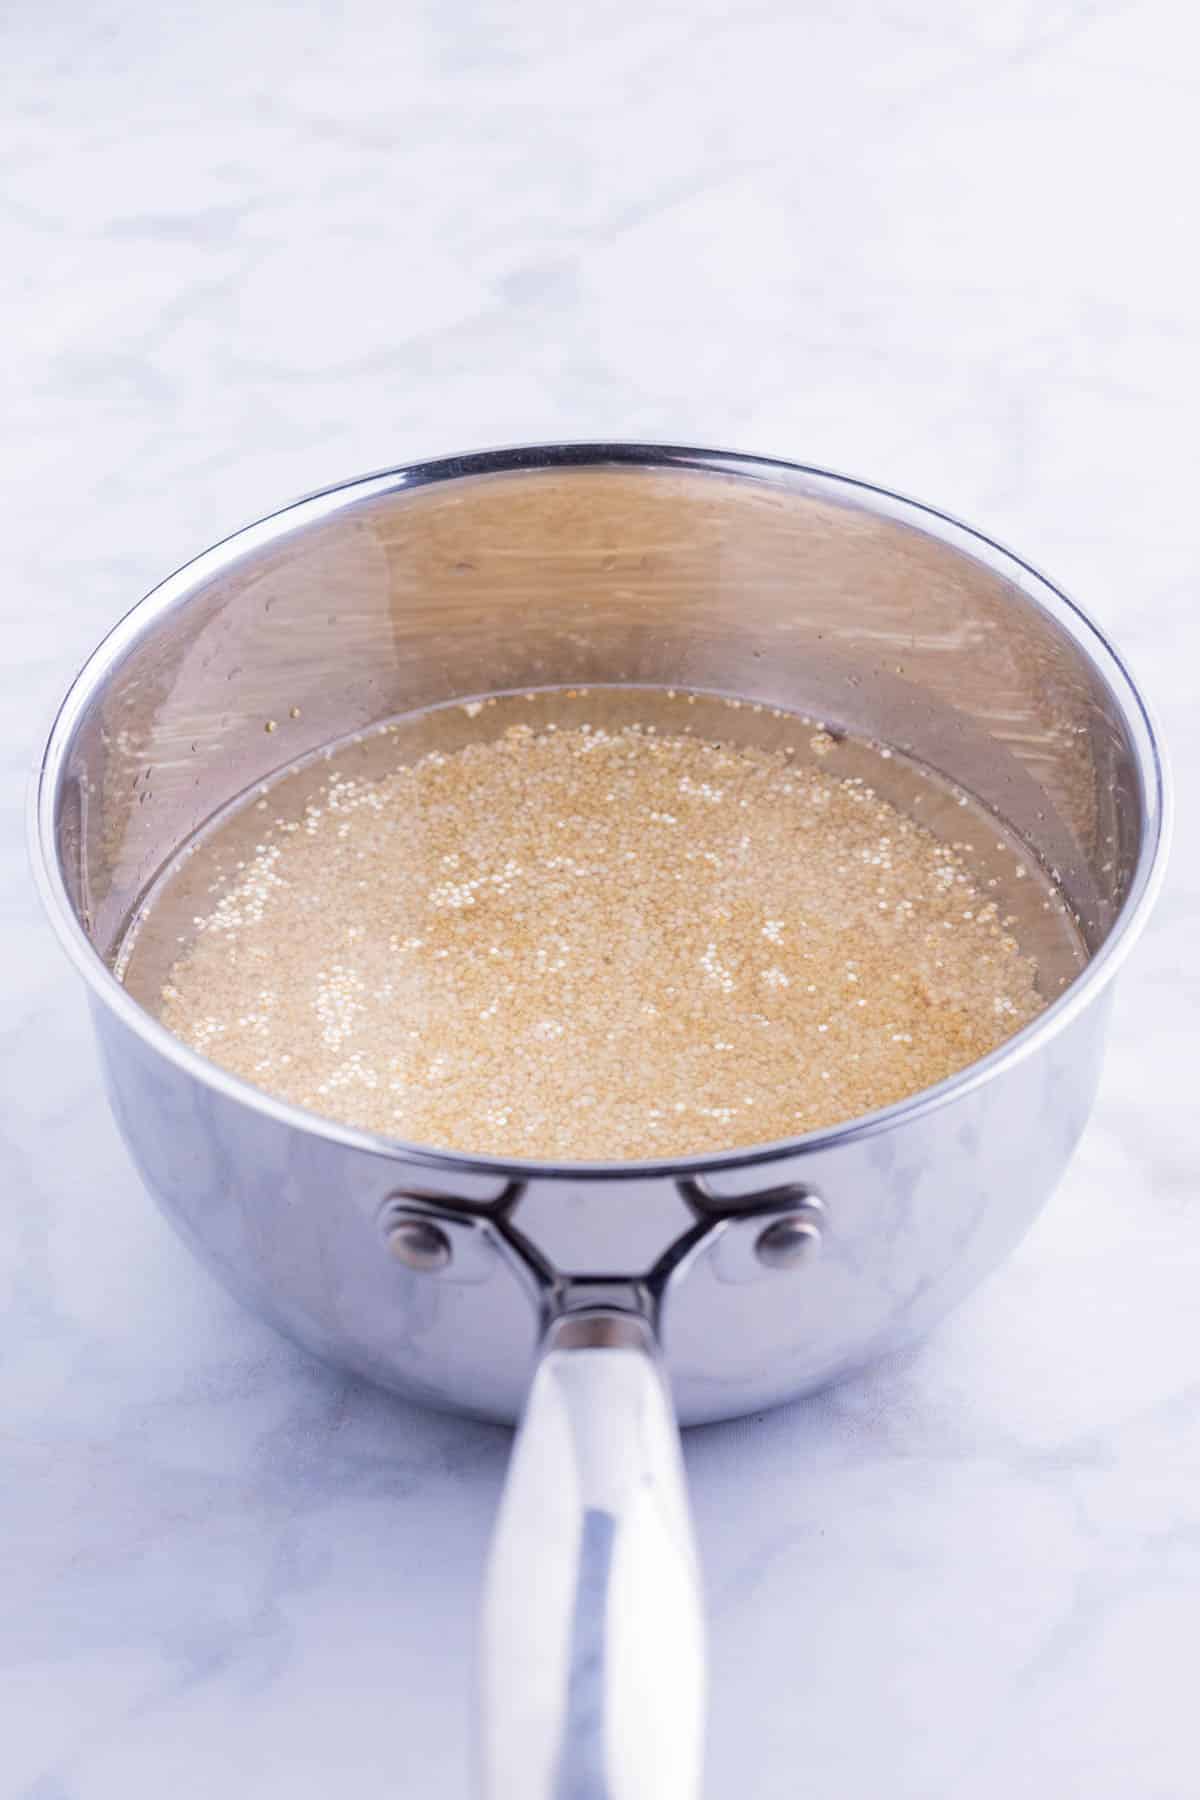 Quinoa is cooked in a saucepan.